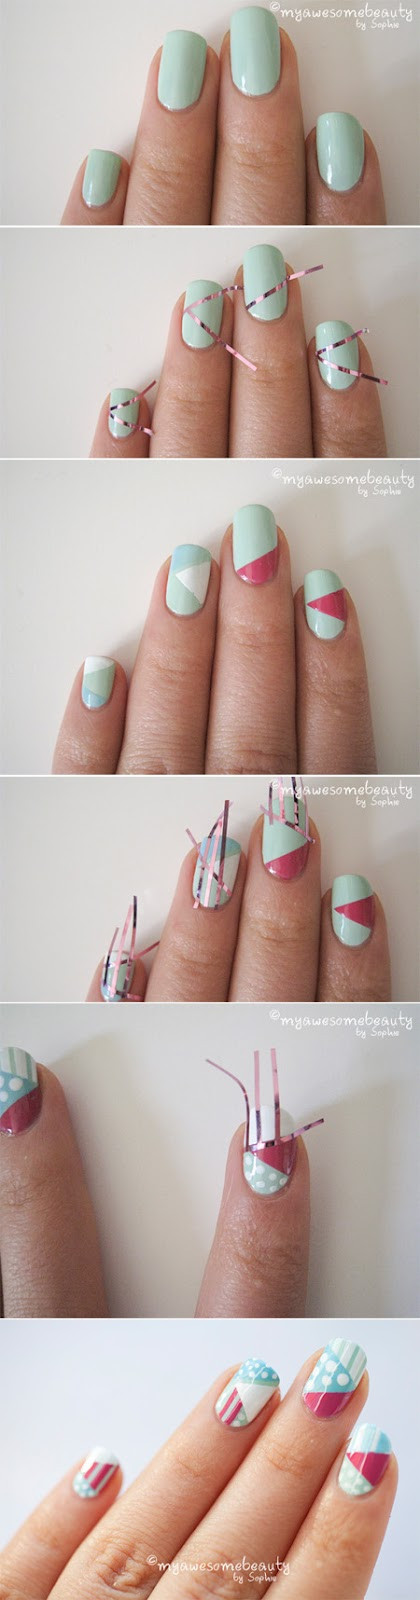 Nail Designs Using Tape
 Paint Me Chic Nail Art Designs Using Scotch Tape